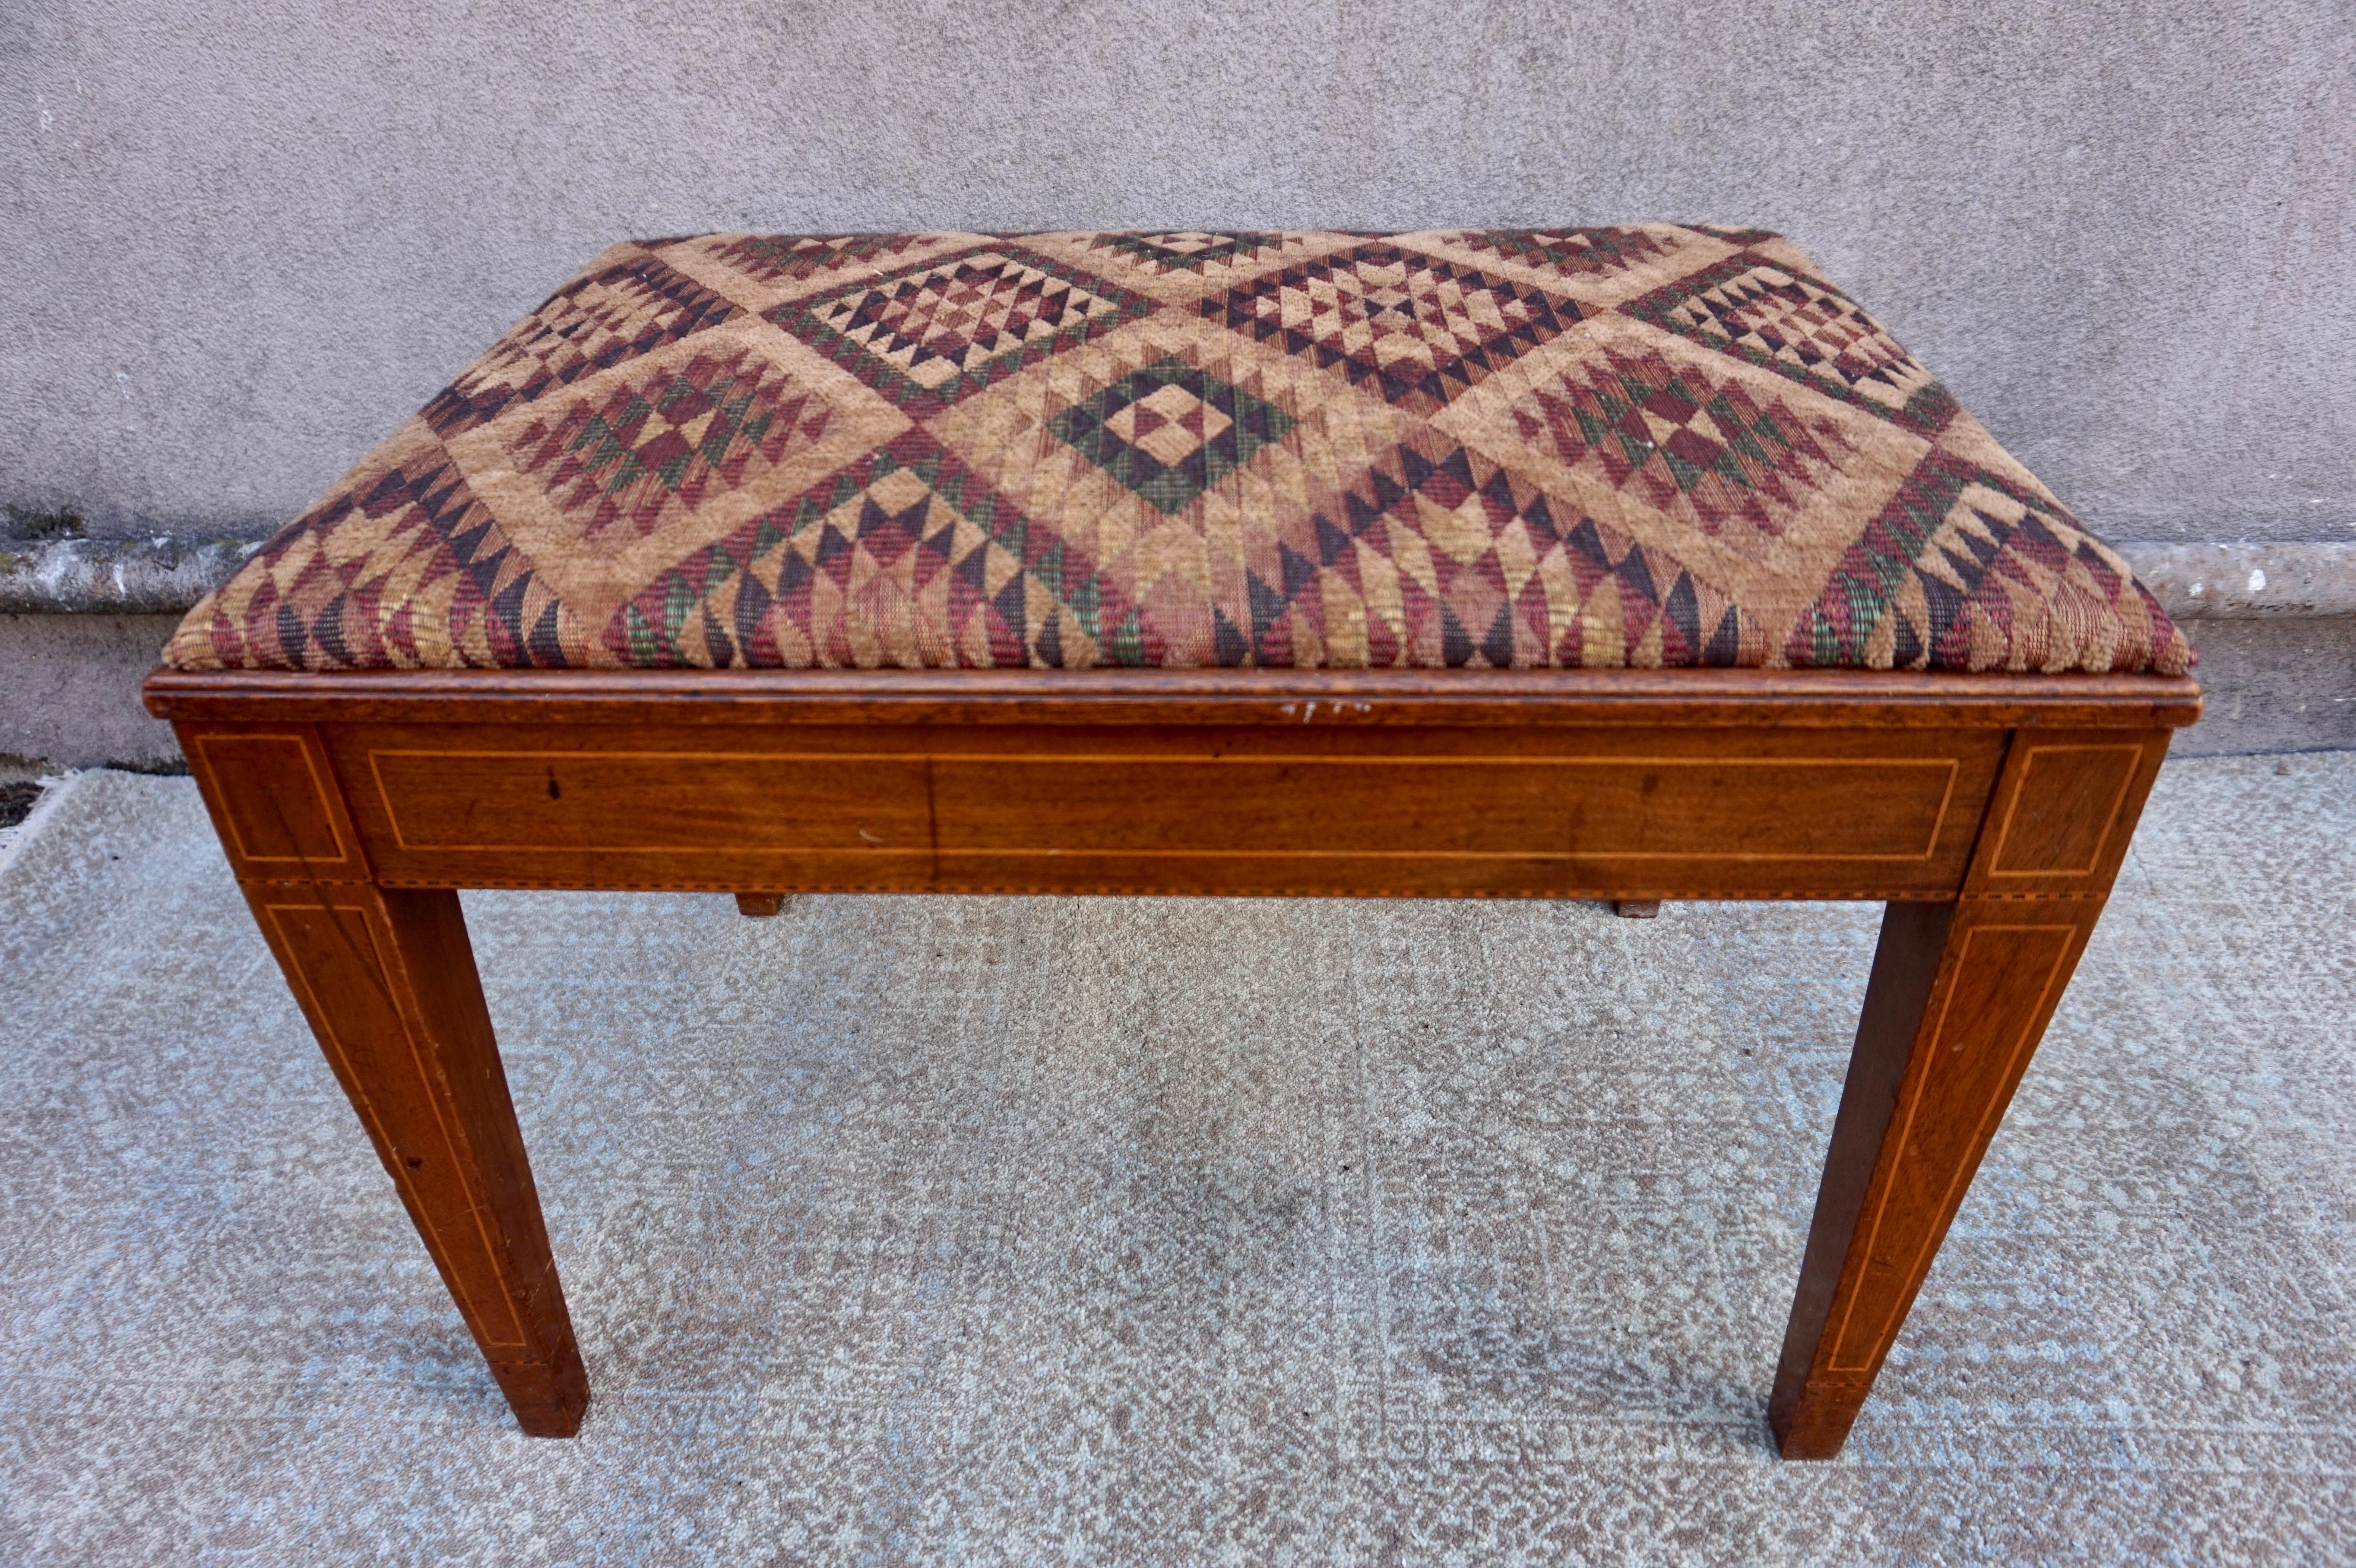 Rare Edwardian Bench with tapering legs and Satinwood inlay. Constructed from solid wood and in good used condition. The chenille fabric has been replaced and the seat dismantles. Ideal for foyer or tight spaces. Sturdy.